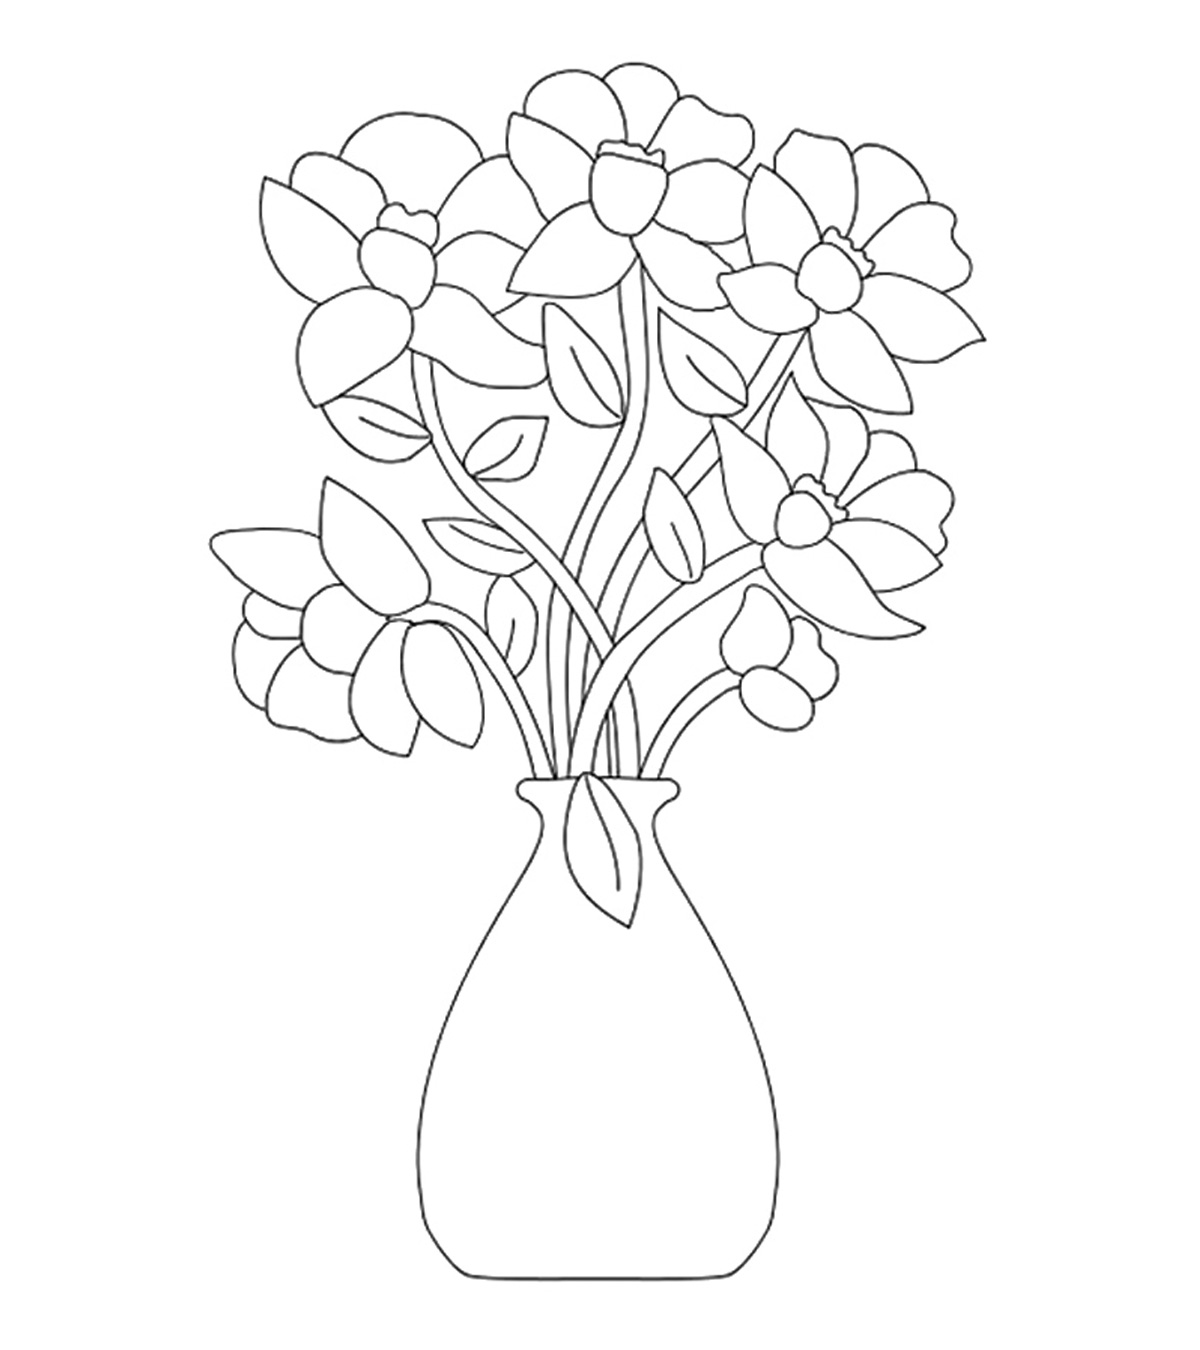 51 Top Mexican Flower Coloring Pages  Images